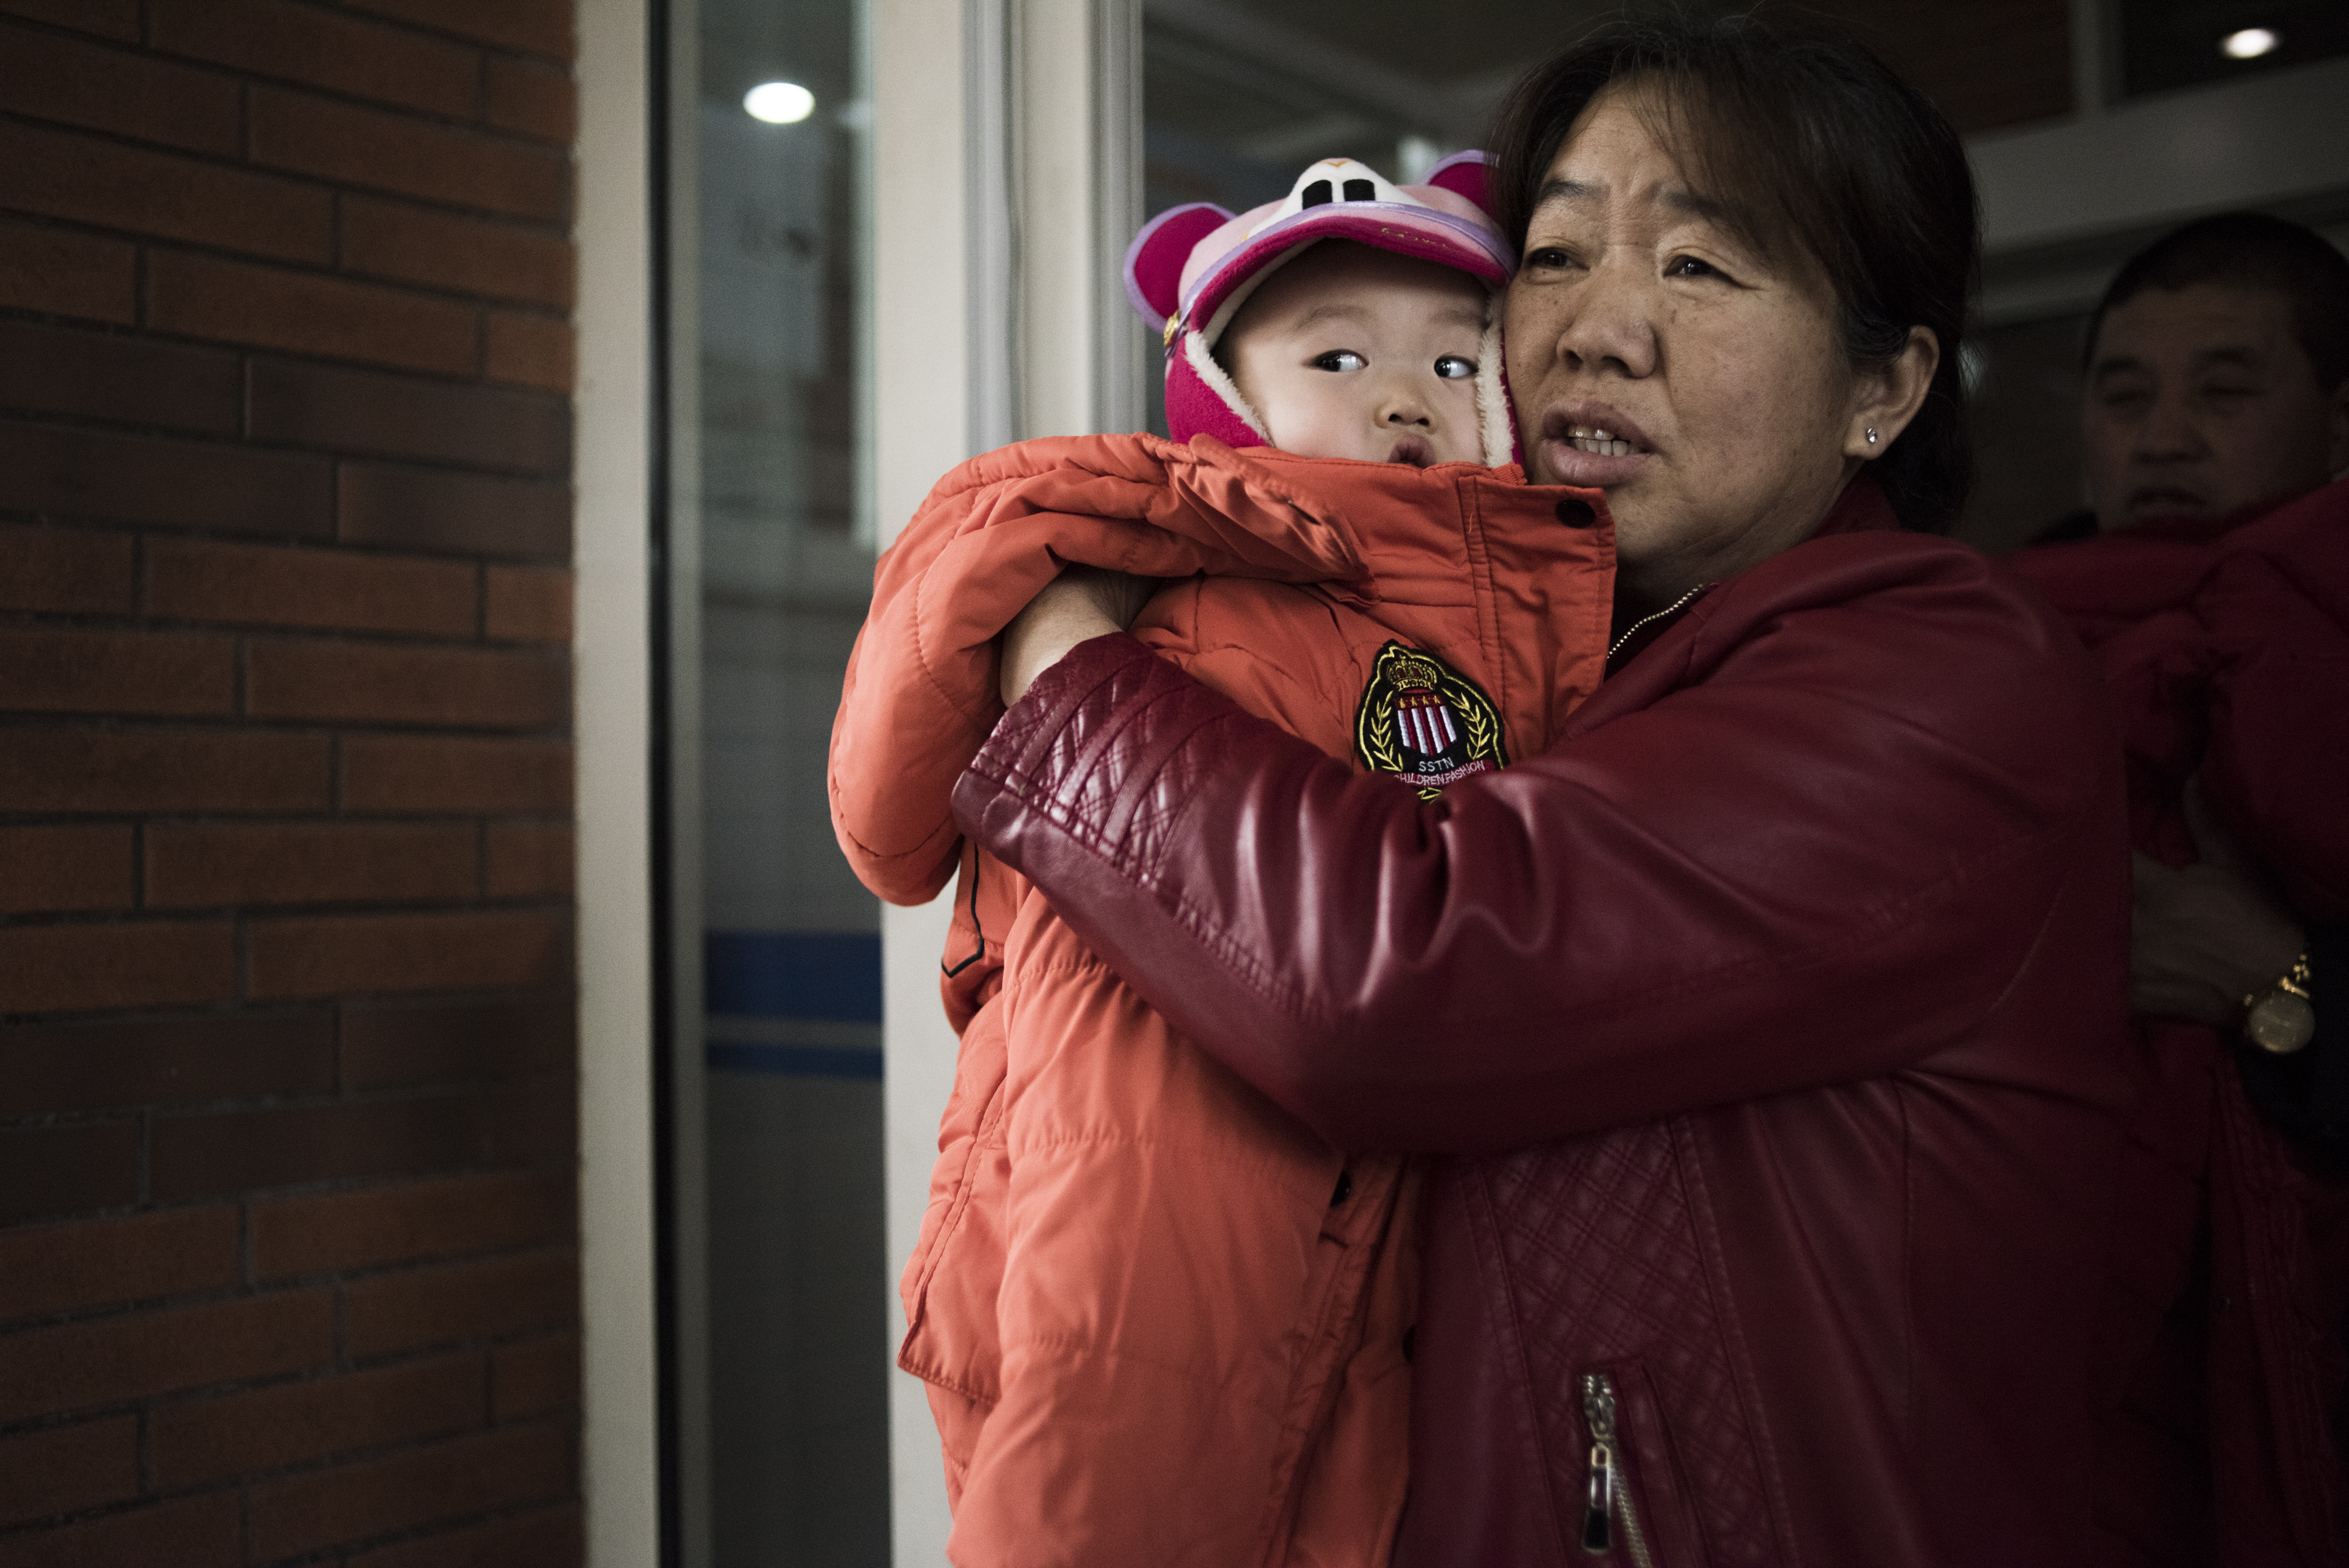 A mother holds her child in Beijing on January 1, 2016. Married couples in China will from January 1, be allowed to have two children, after concerns over an ageing population and shrinking workforce ushered in an end to the country's controversial one-child policy. AFP PHOTO / FRED DUFOUR / AFP PHOTO / FRED DUFOUR